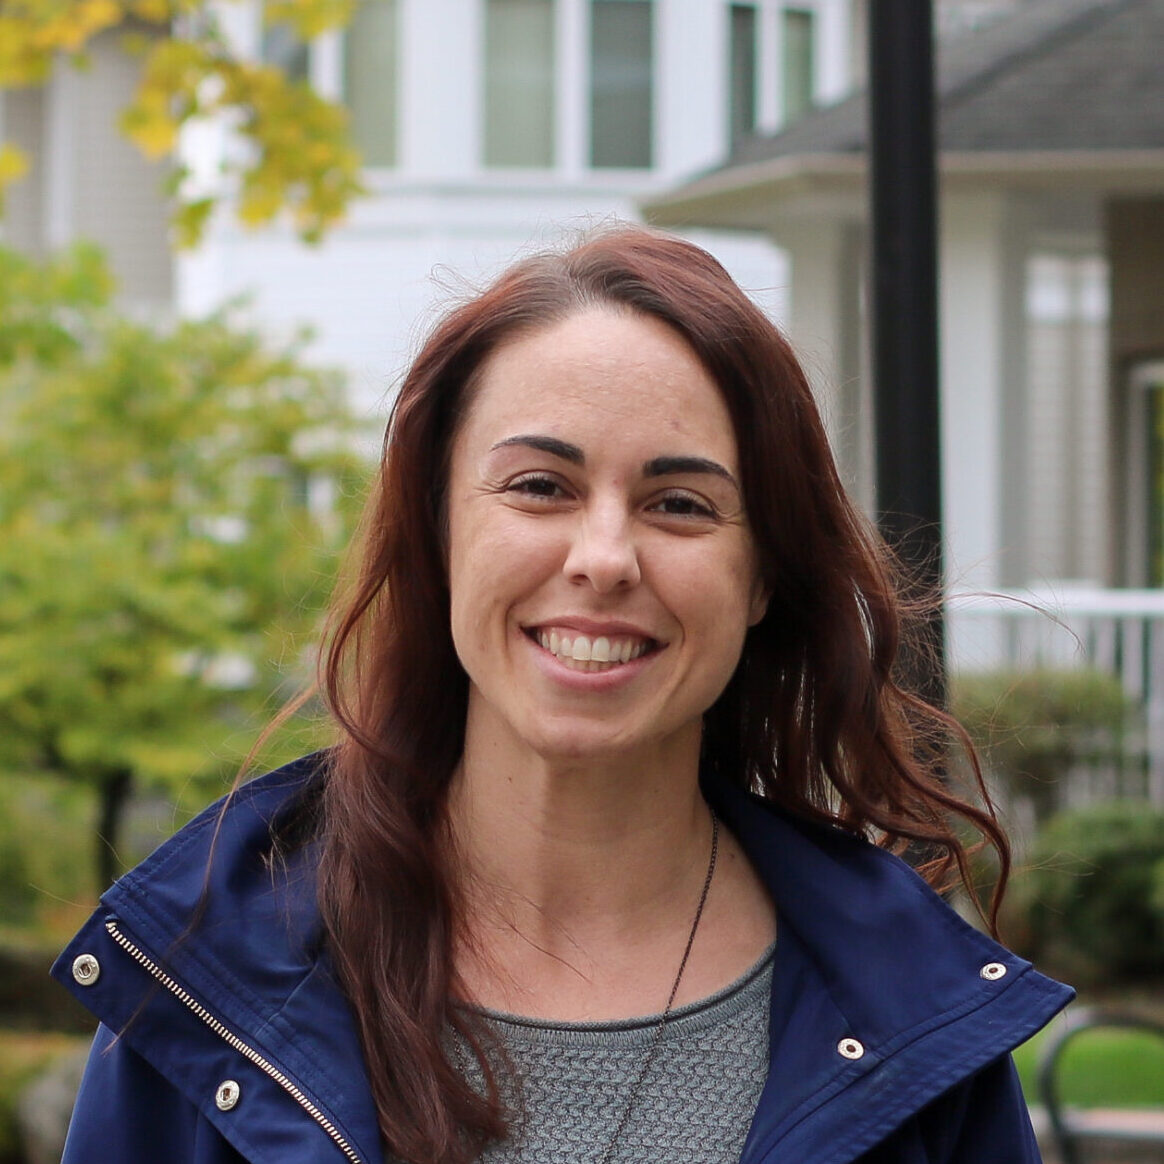 a woman with long brown hair outside wearing a grey shirt under a blue jacket. She is smiling. There are green trees and a white houses visible in the background